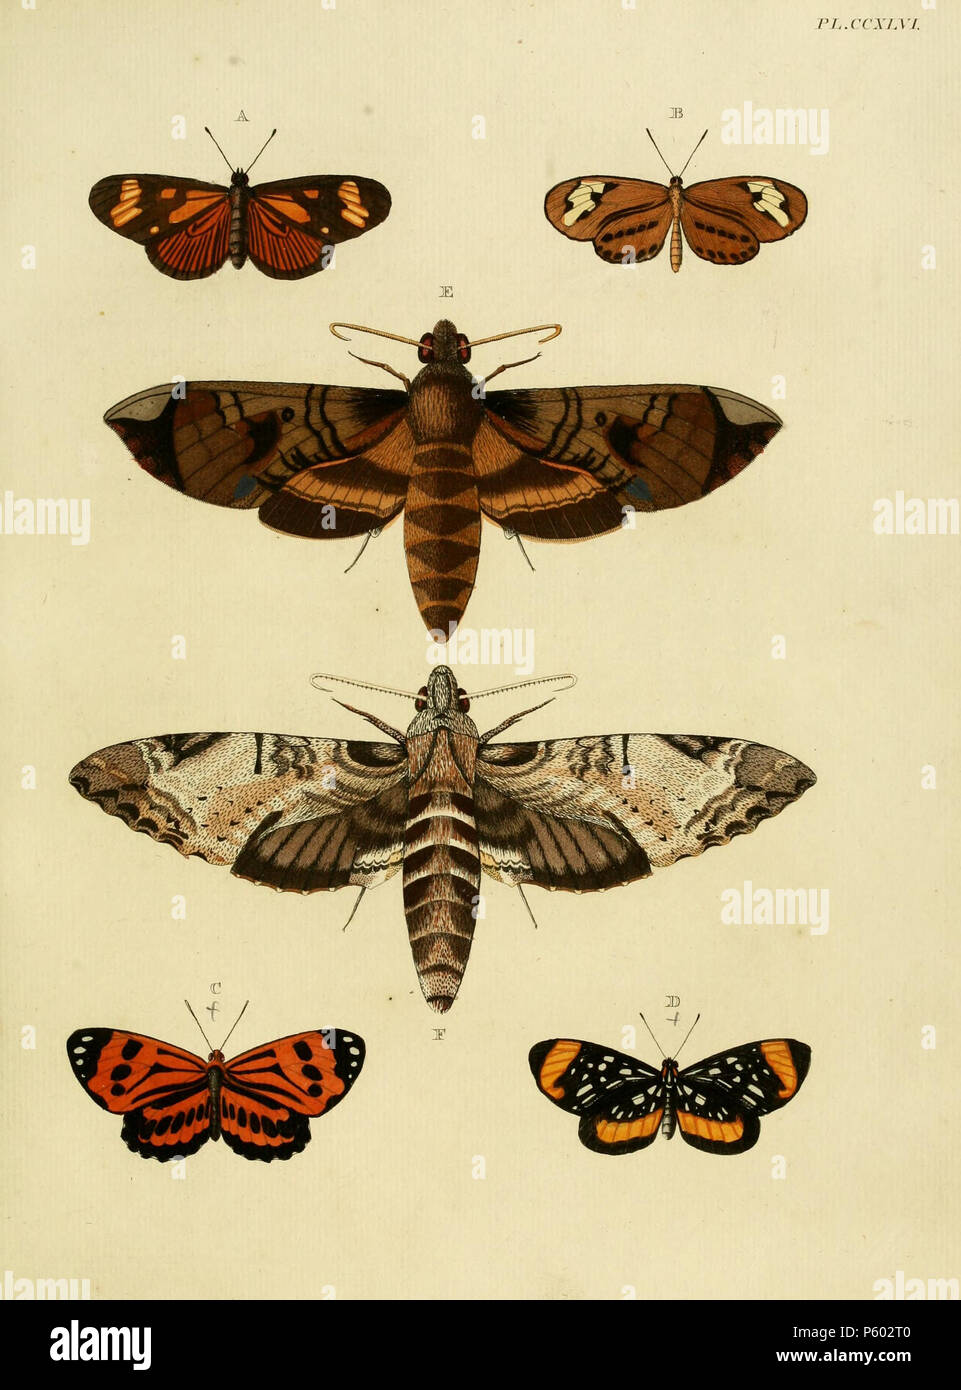 N/A.  Plate CCXLVI  A: '(Papilio) Thalia' ( = Actinote thalia (Linnaeus, 1758), see Funet. Photo at Tree of Life.  B: '(Papilio) Rosalia' ( = Sais rosalia (Cramer, [1779]), iconotype), see The Global Lepidoptera Names Index, NHM and Funet. Photo at Tree of Life.  C: '(Papilio) Calliope' ( = Stalachtis calliope (Linnaeus, 1758)), see Funet. Photo at Tree of Life.  Also on plate 133 F as '(Papilio) Eugenia'.  D: '(Papilio) Euterpe' ( = Stalachtis euterpe (Linnaeus, 1758)), see Funet.  E: '(Sphinx) Ficus' ( = Pachylia ficus (Linnaeus, 1758)), see Funet. Photos at Barcode of Life.  F: '(Sphinx) Ha Stock Photo